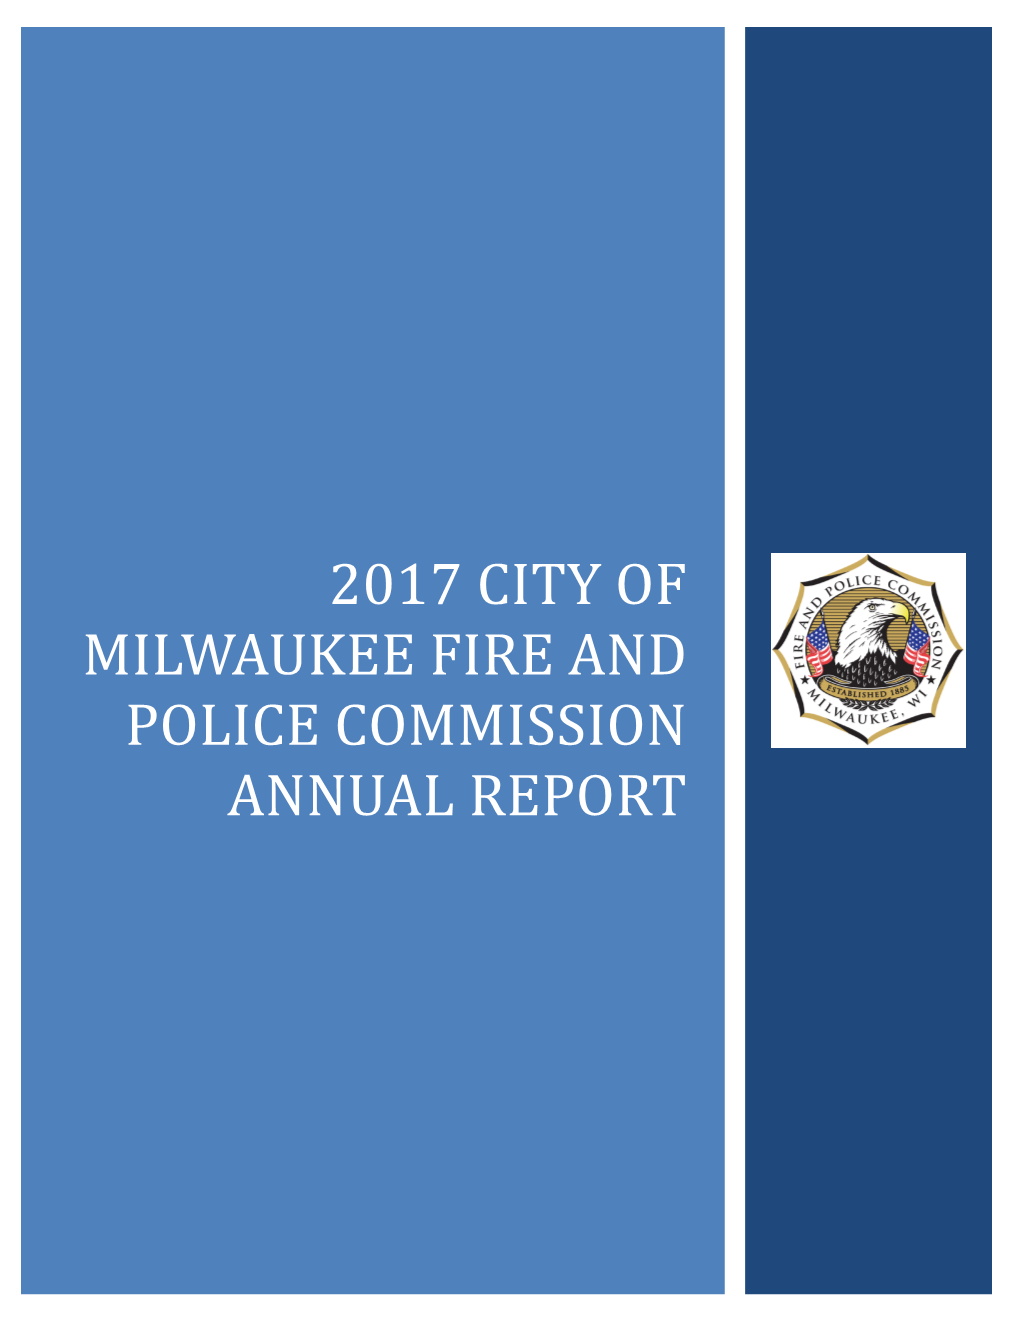 2017 City of Milwaukee Fire and Police Commission Annual Report 1